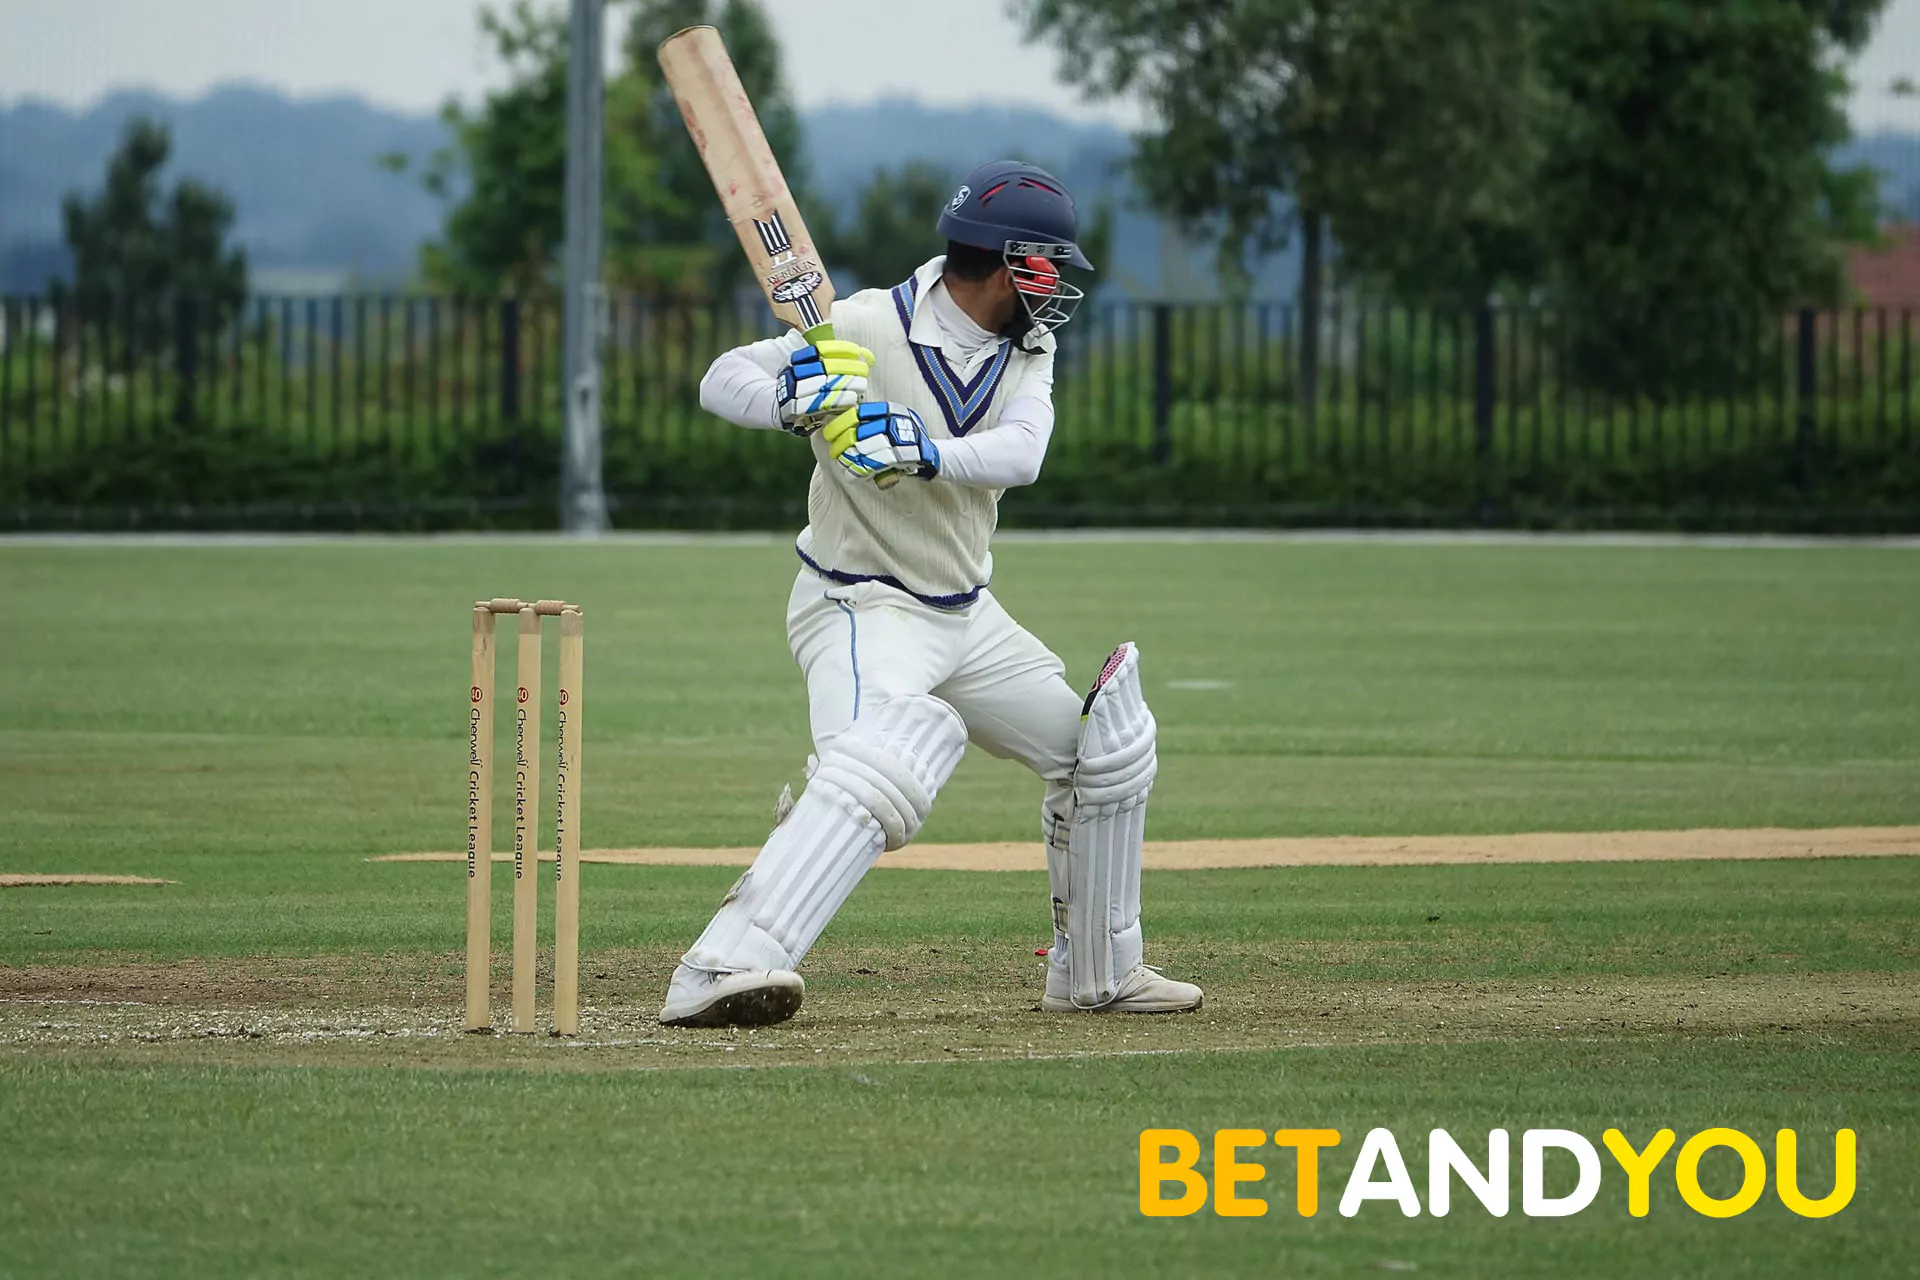 You can find almost all existing cricket leagues in Betandyou sportsbook.